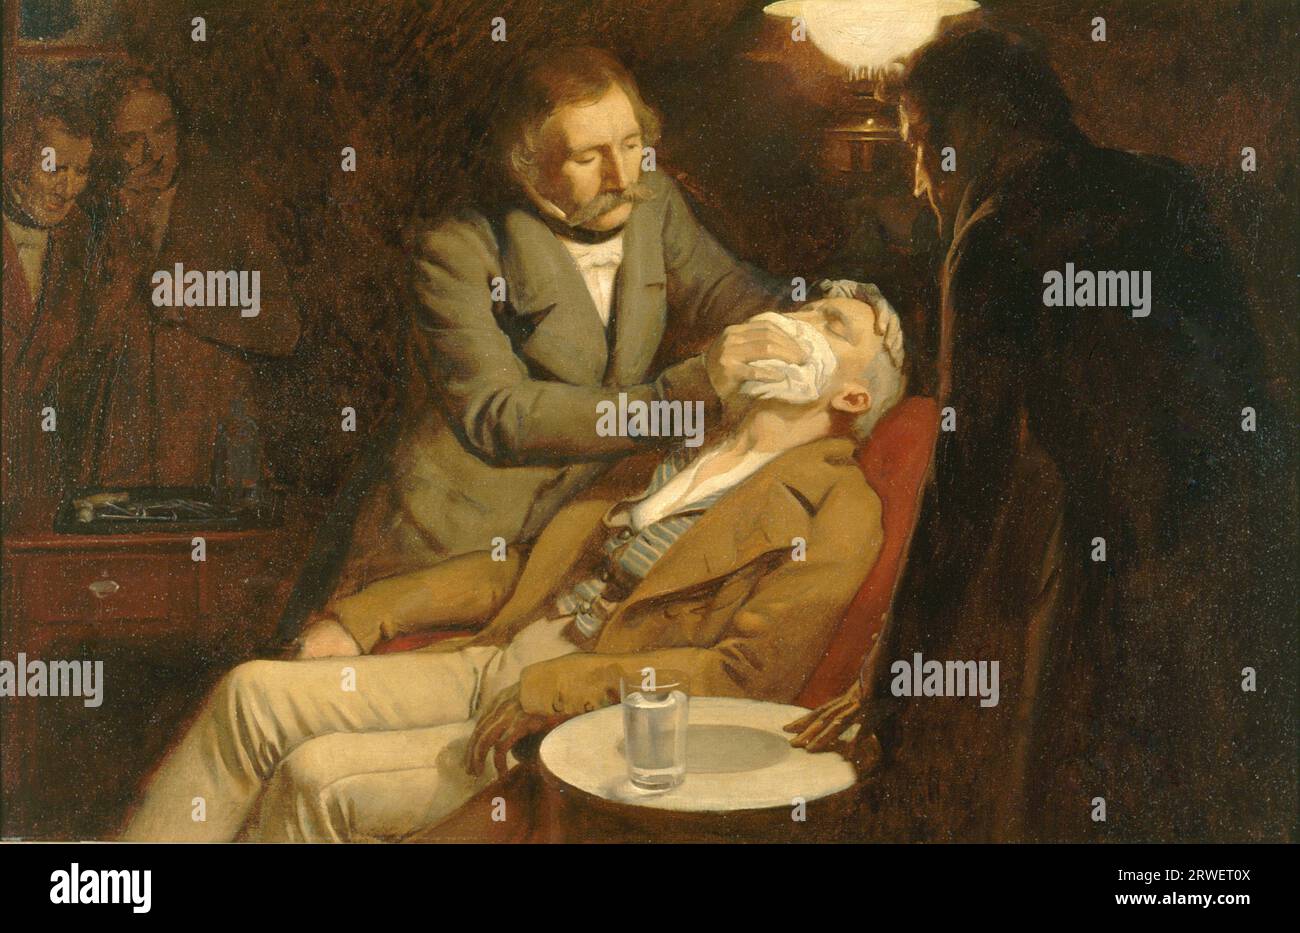 Dentist, the first use of ether for anesthesia in dental surgery, 1846, Historic, digitally restored reproduction of an original of the time. Stock Photo